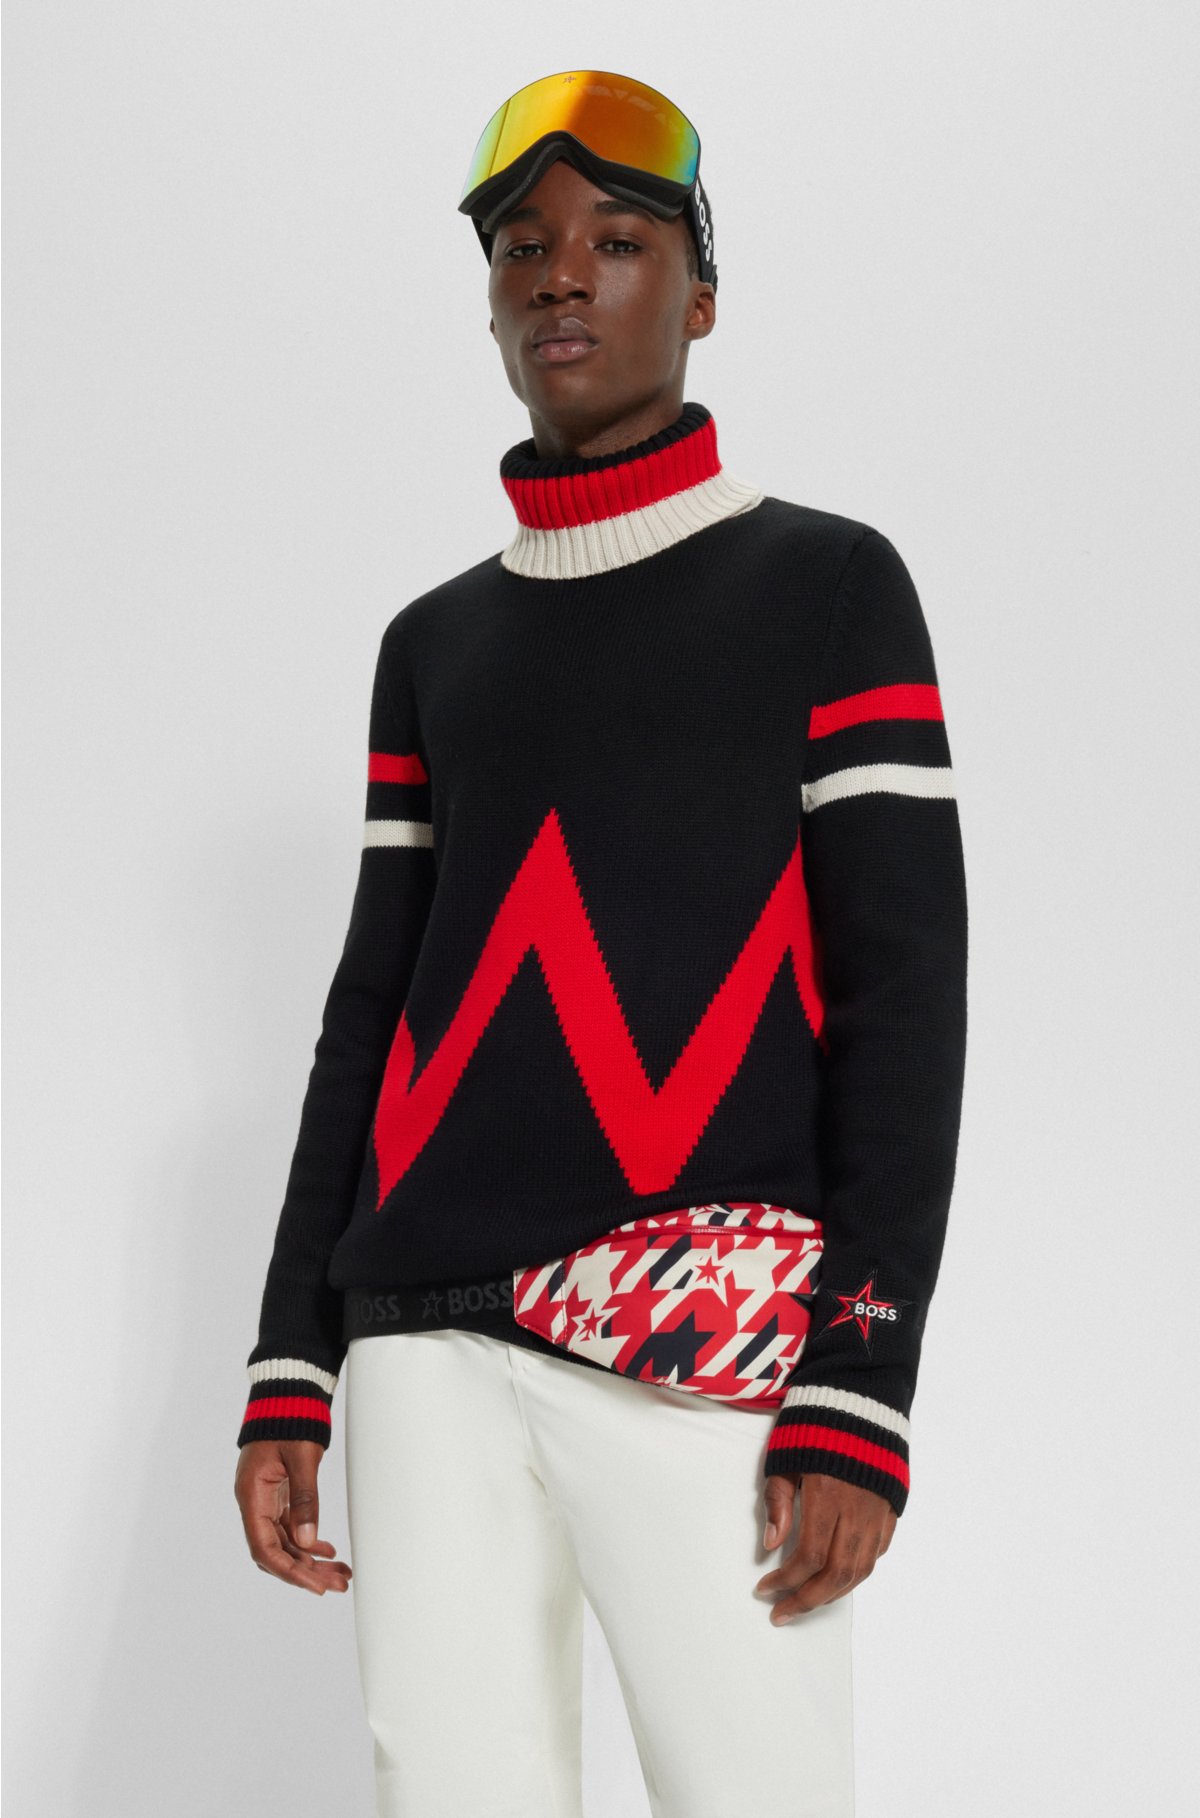 BOSS - Knitted sweater